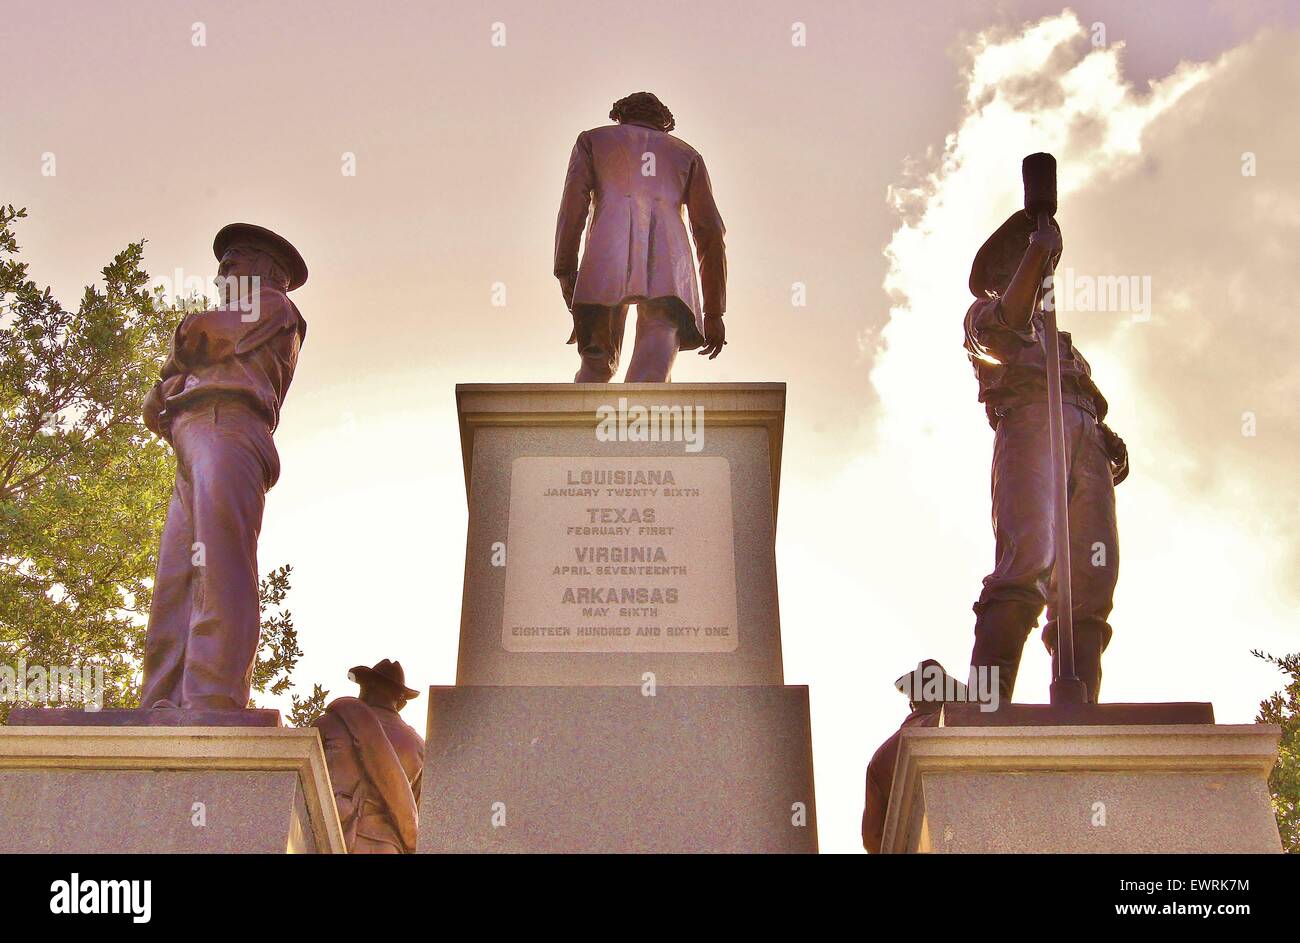 Austin, Texas, USA. 29th June, 2015. CONFEDERATE SOLDIERS.Erected beginning in 1903 by surviving comrades.Five bronze figures on a gray granite base represent the Infantry, Cavalry, Artillery, and Navy, headed by the Confederate president, Jefferson Davis. Etched in the base are the 13 states which withdrew from the Union and formed the Southern Confederacy, as well as the battles fought between 1861 and 1865. The bronze figures were executed by Pompeo Coppini. Monument erected by Frank Teich. © Jeff Newman/Globe Photos/ZUMA Wire/Alamy Live News Stock Photo